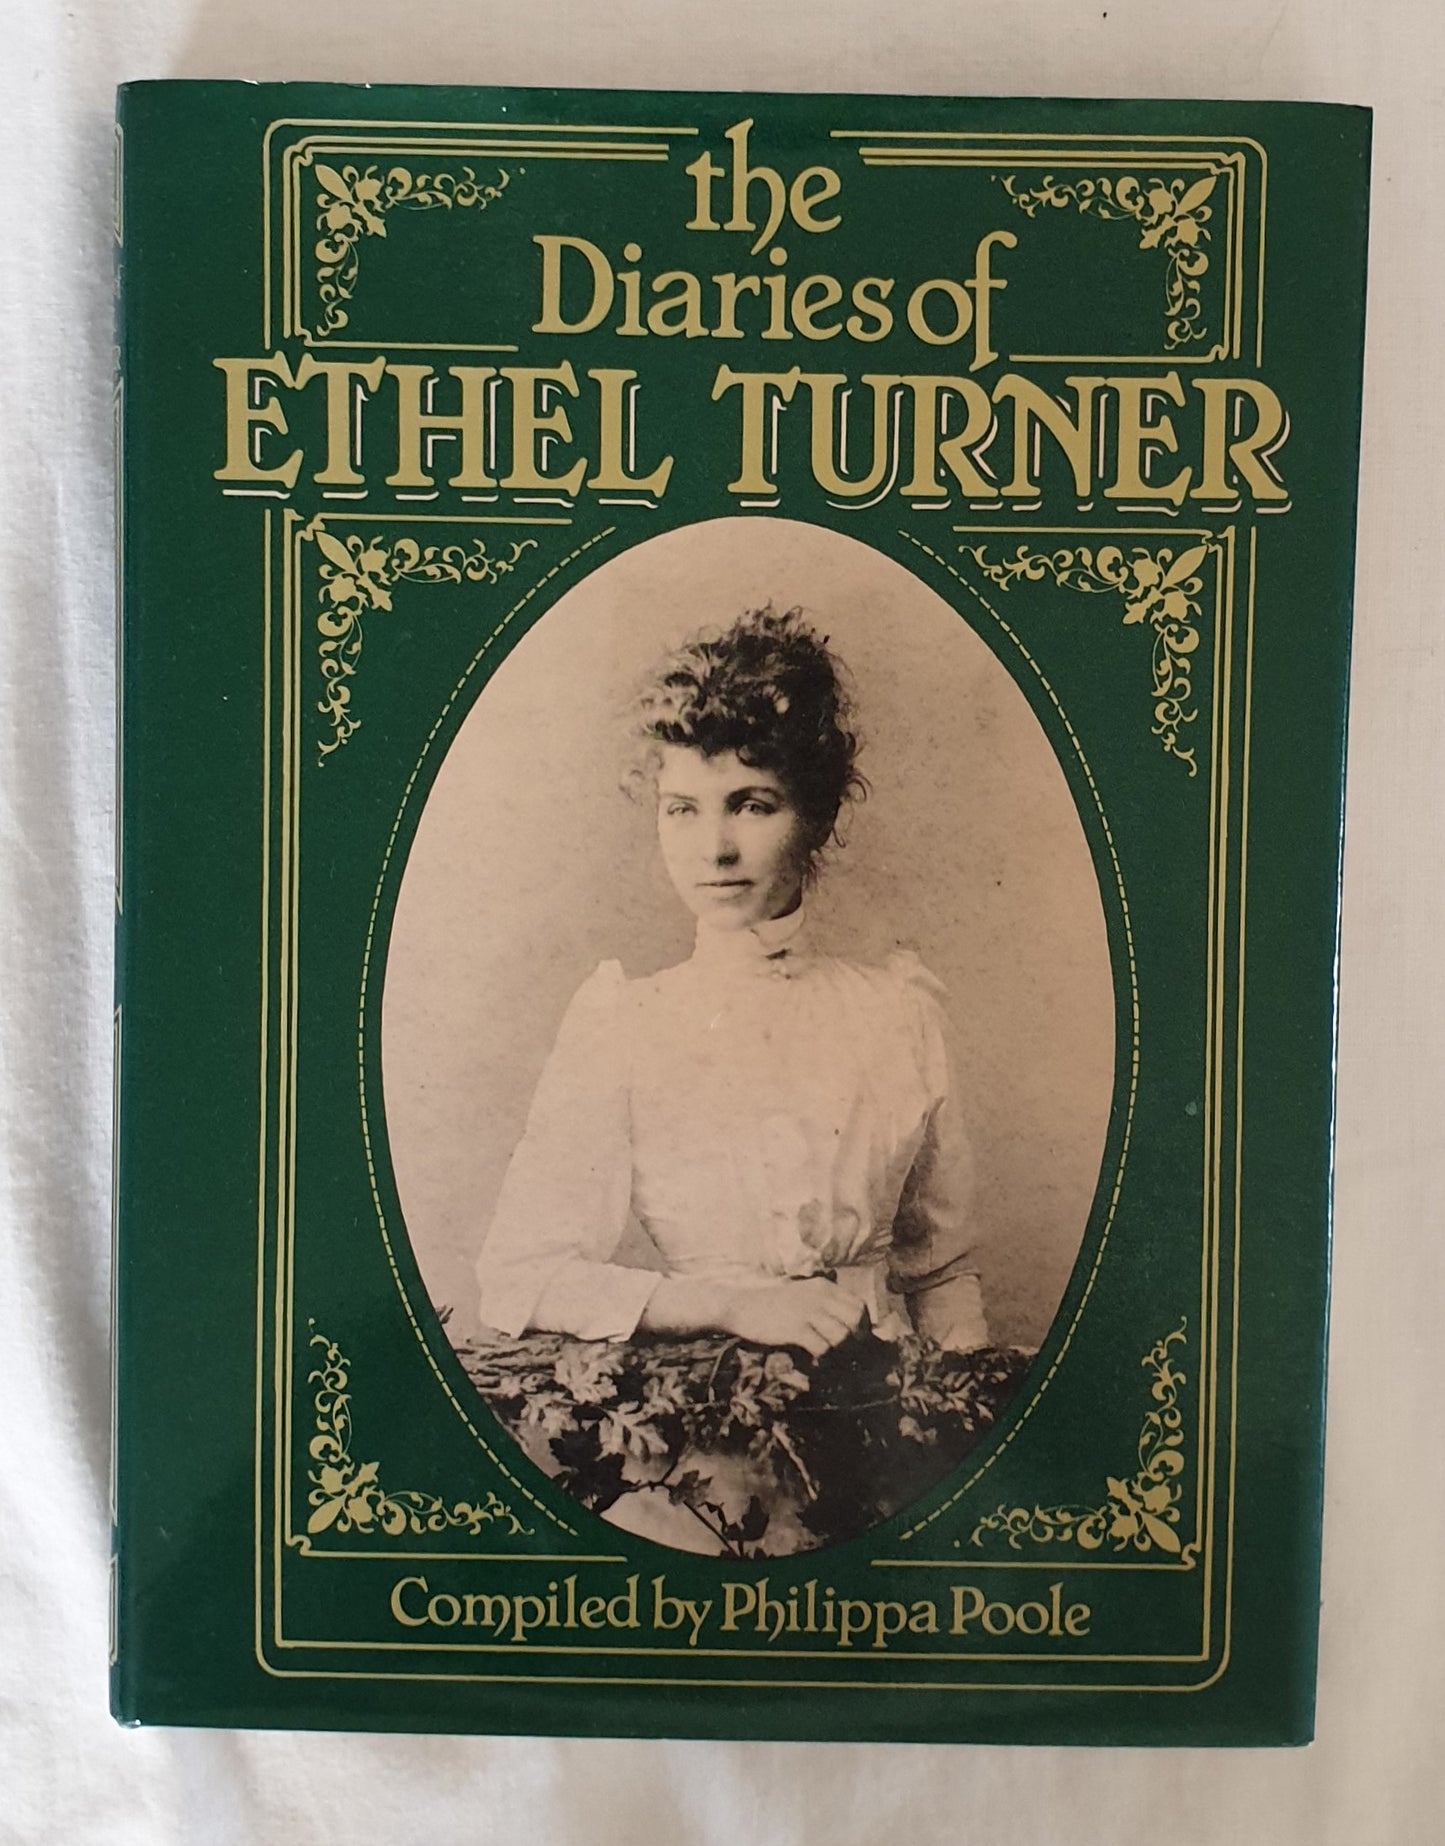 The Diaries of Ethel Turner  Compiled by Philippa Poole